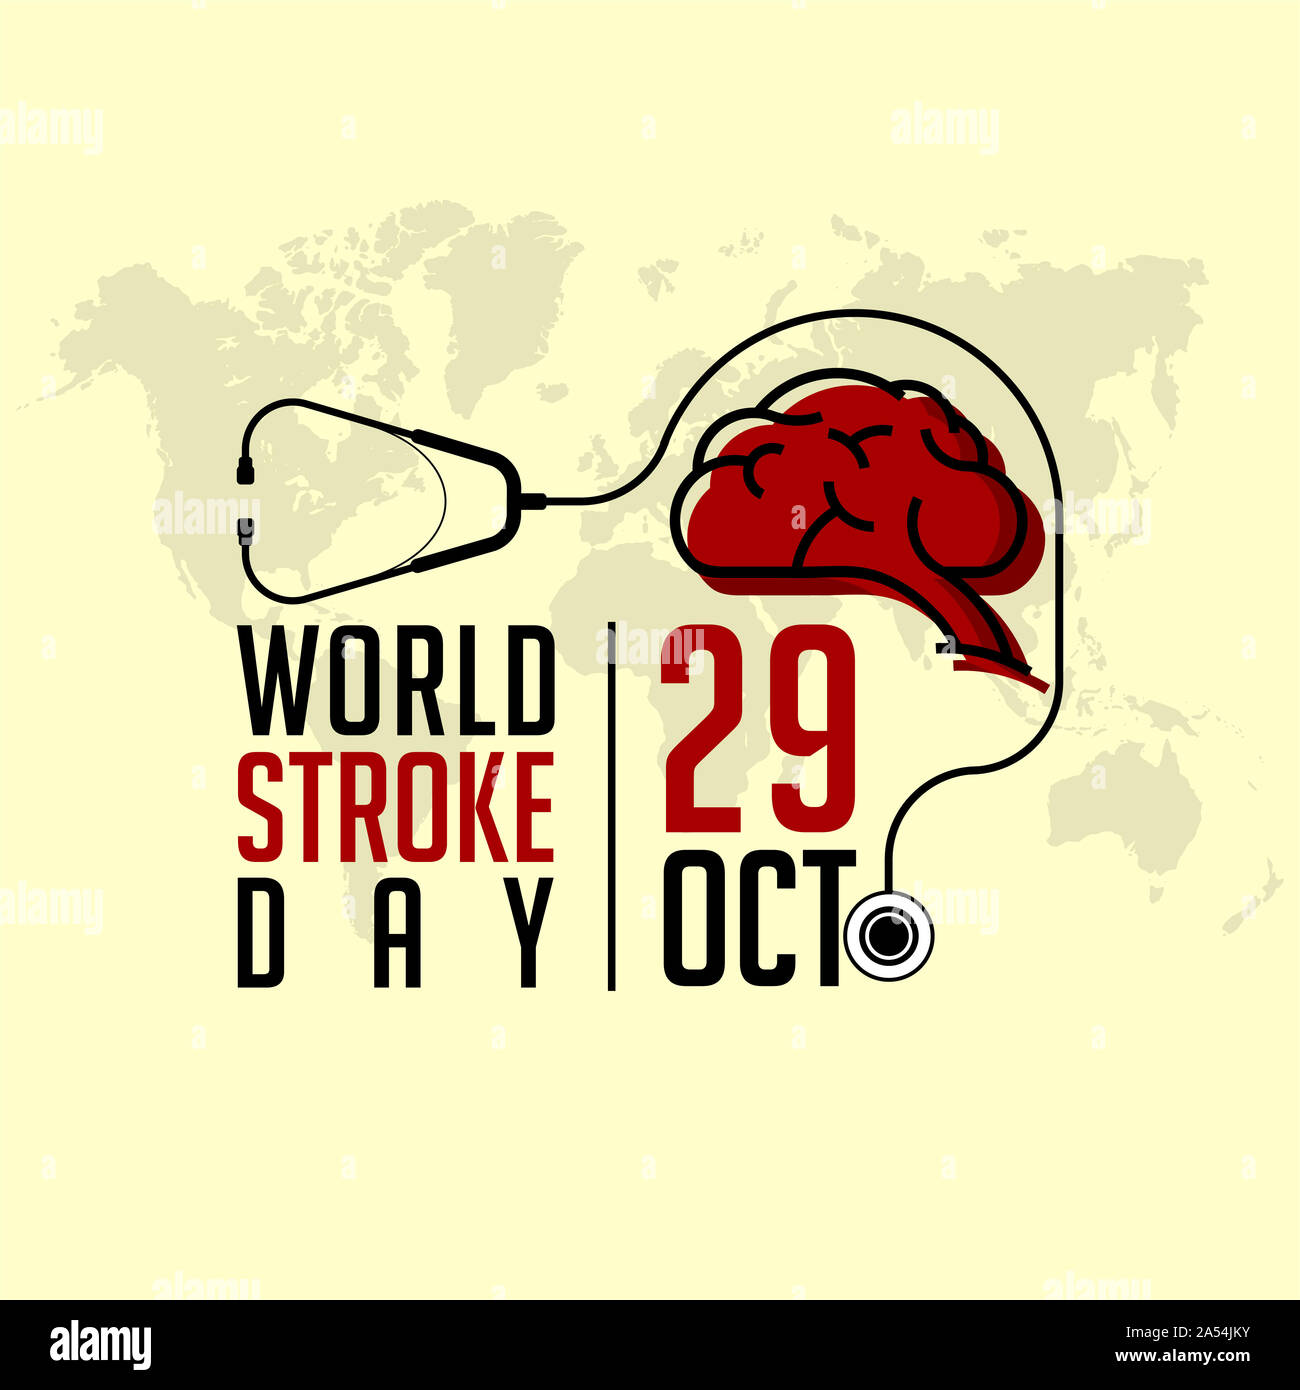 World Stroke Day on October 29, With Stethoscope and Brain vector design Stock Photo